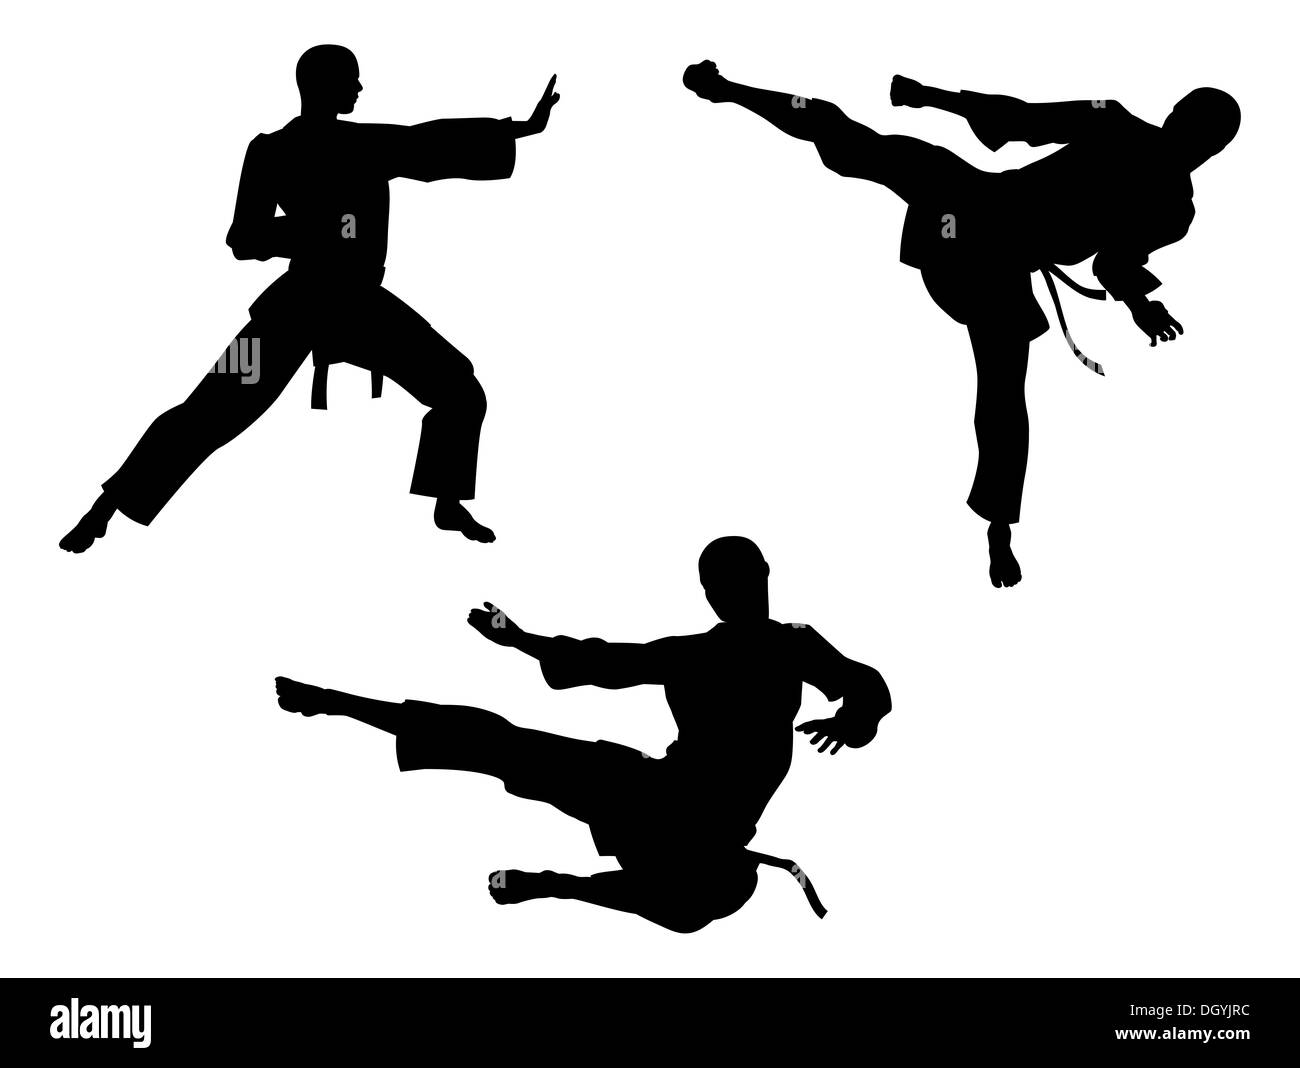 Karate martial art silhouettes of men in various karate or other martial art poses, including high kick and flying kick Stock Photo